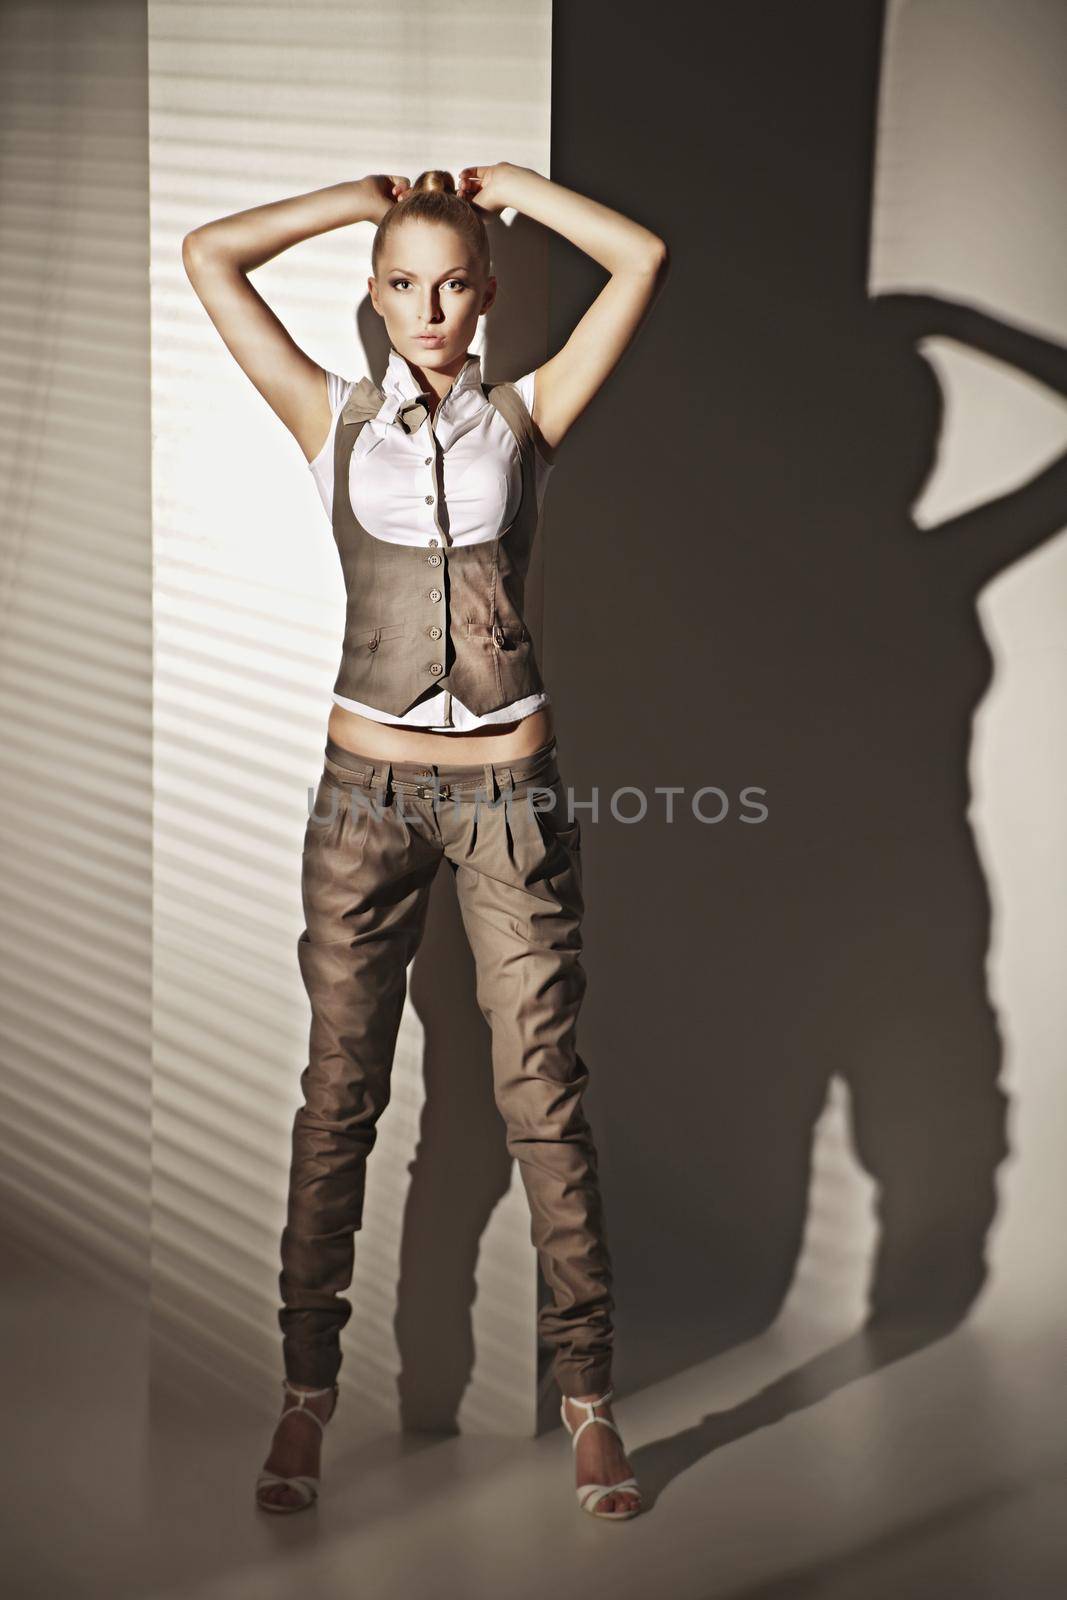 Fashion photo of sensual blonde woman in suit with shadow of jalousie